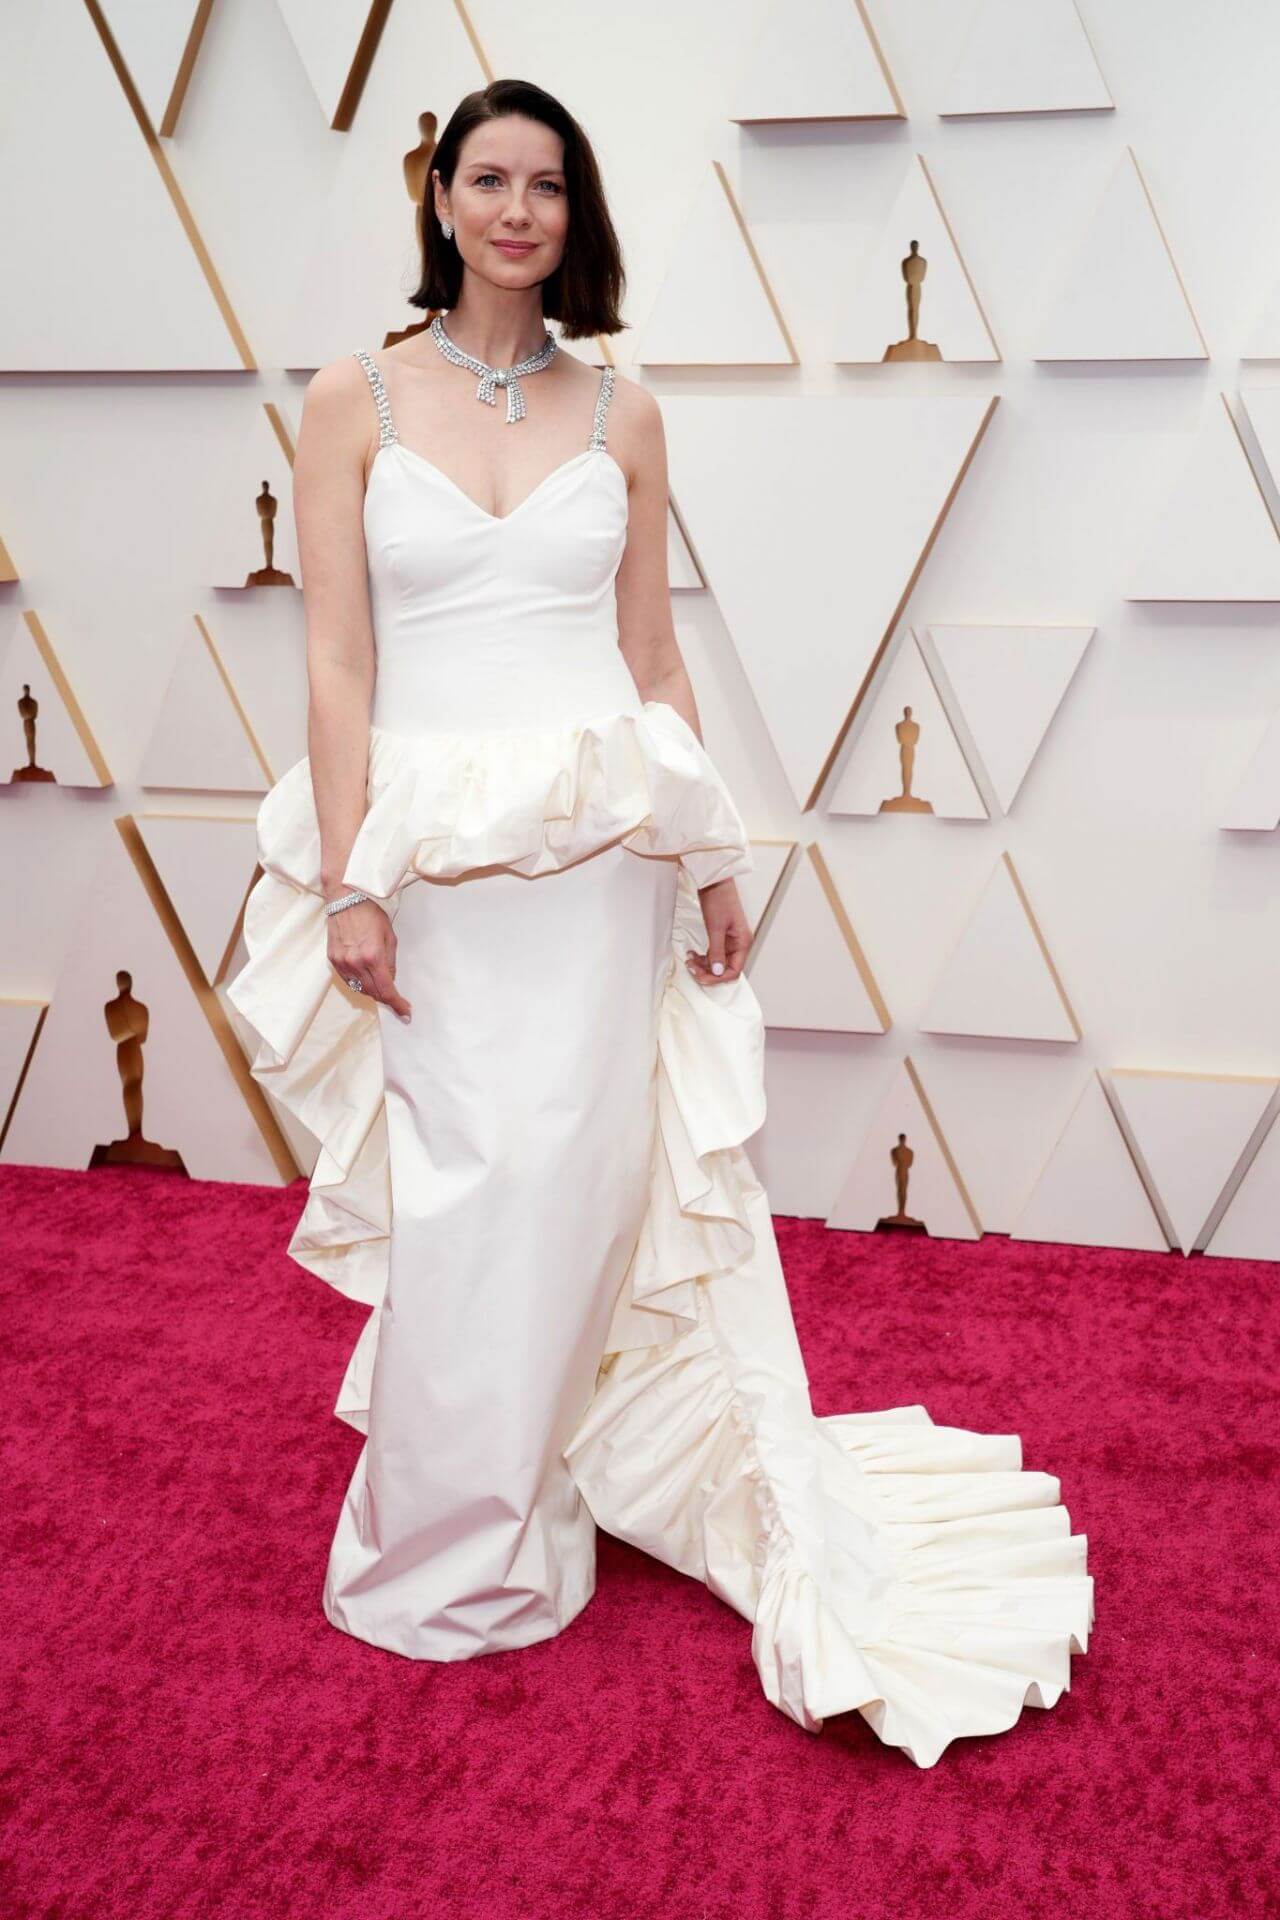 Caitriona Balfe Stunning Looks In Off White With Draping Style Ruffle Gown At Oscars  Red Carpet